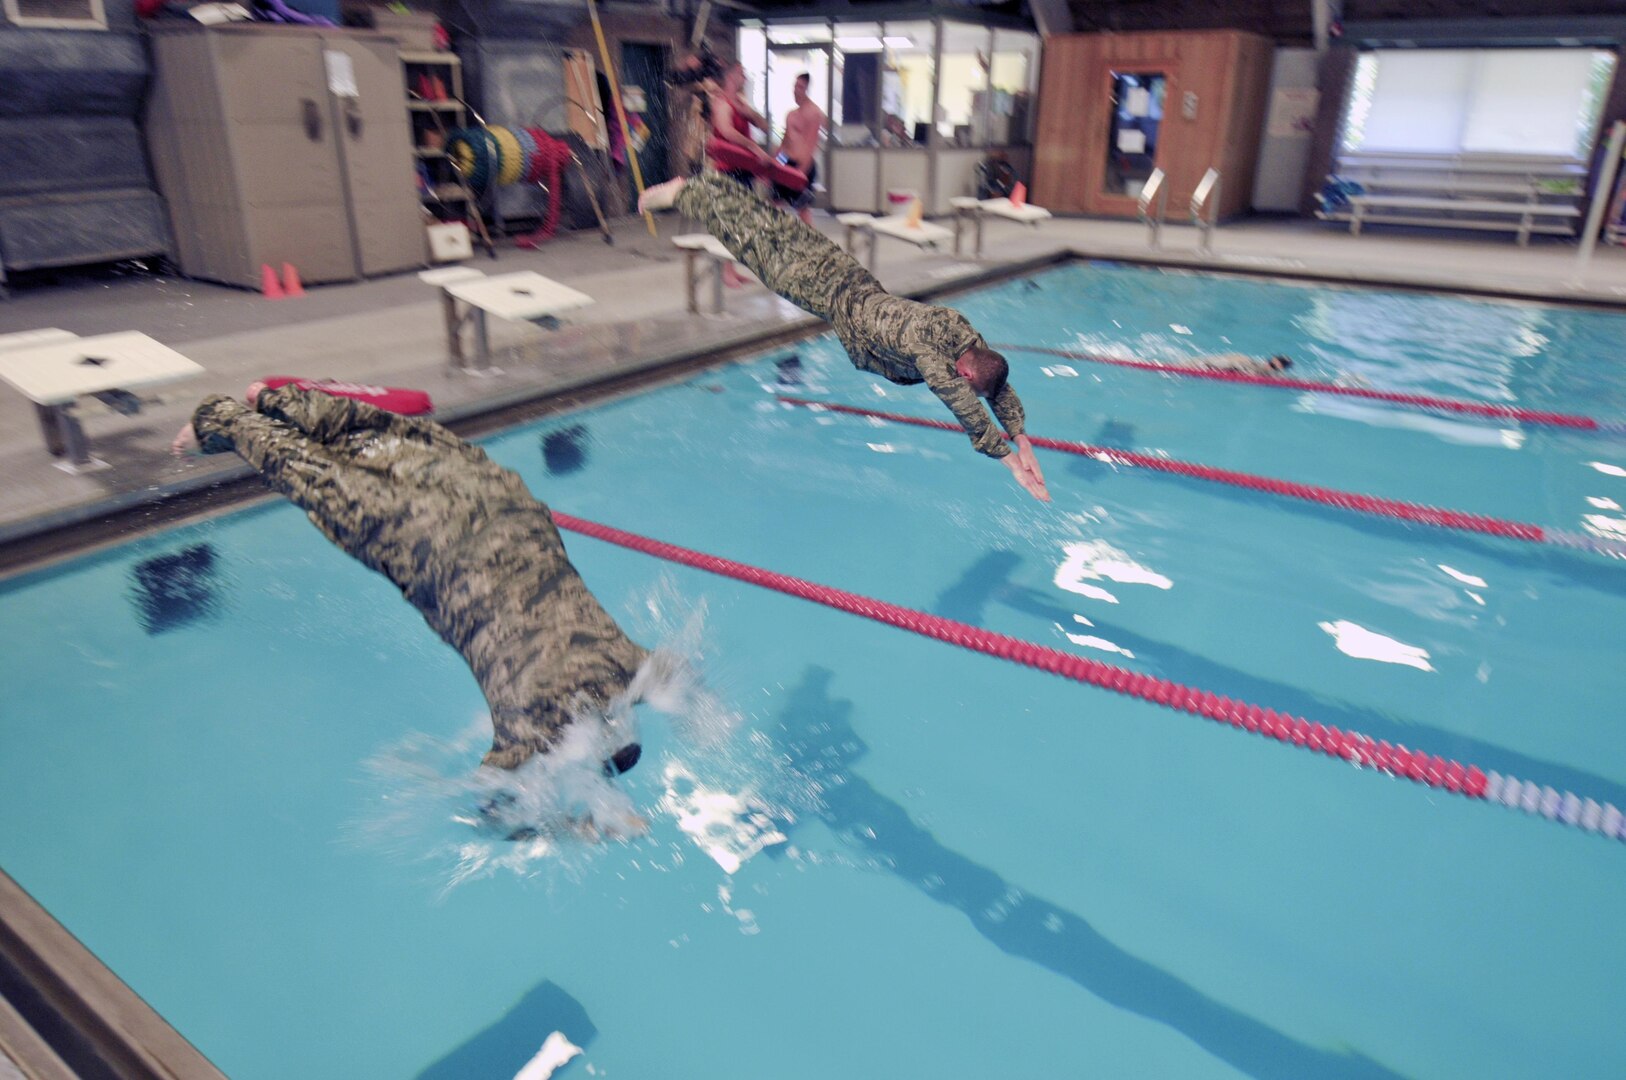 New York Air National Guard Senior Airman Dominic Scaringe and Staff Sgt. Jeffrey Valk compete in the swim portion of the German Armed Forces Proficiency Badge Competition on June 16, 2016, at the Glenville, N.Y., YMCA. Eight Airmen with the 109th Airlift Wing competed in the second phase of the competition - to qualify they needed to swim 100 meters in under 4 minutes. The unit is based at Stratton Air National Guard Base in Scotia, N.Y.